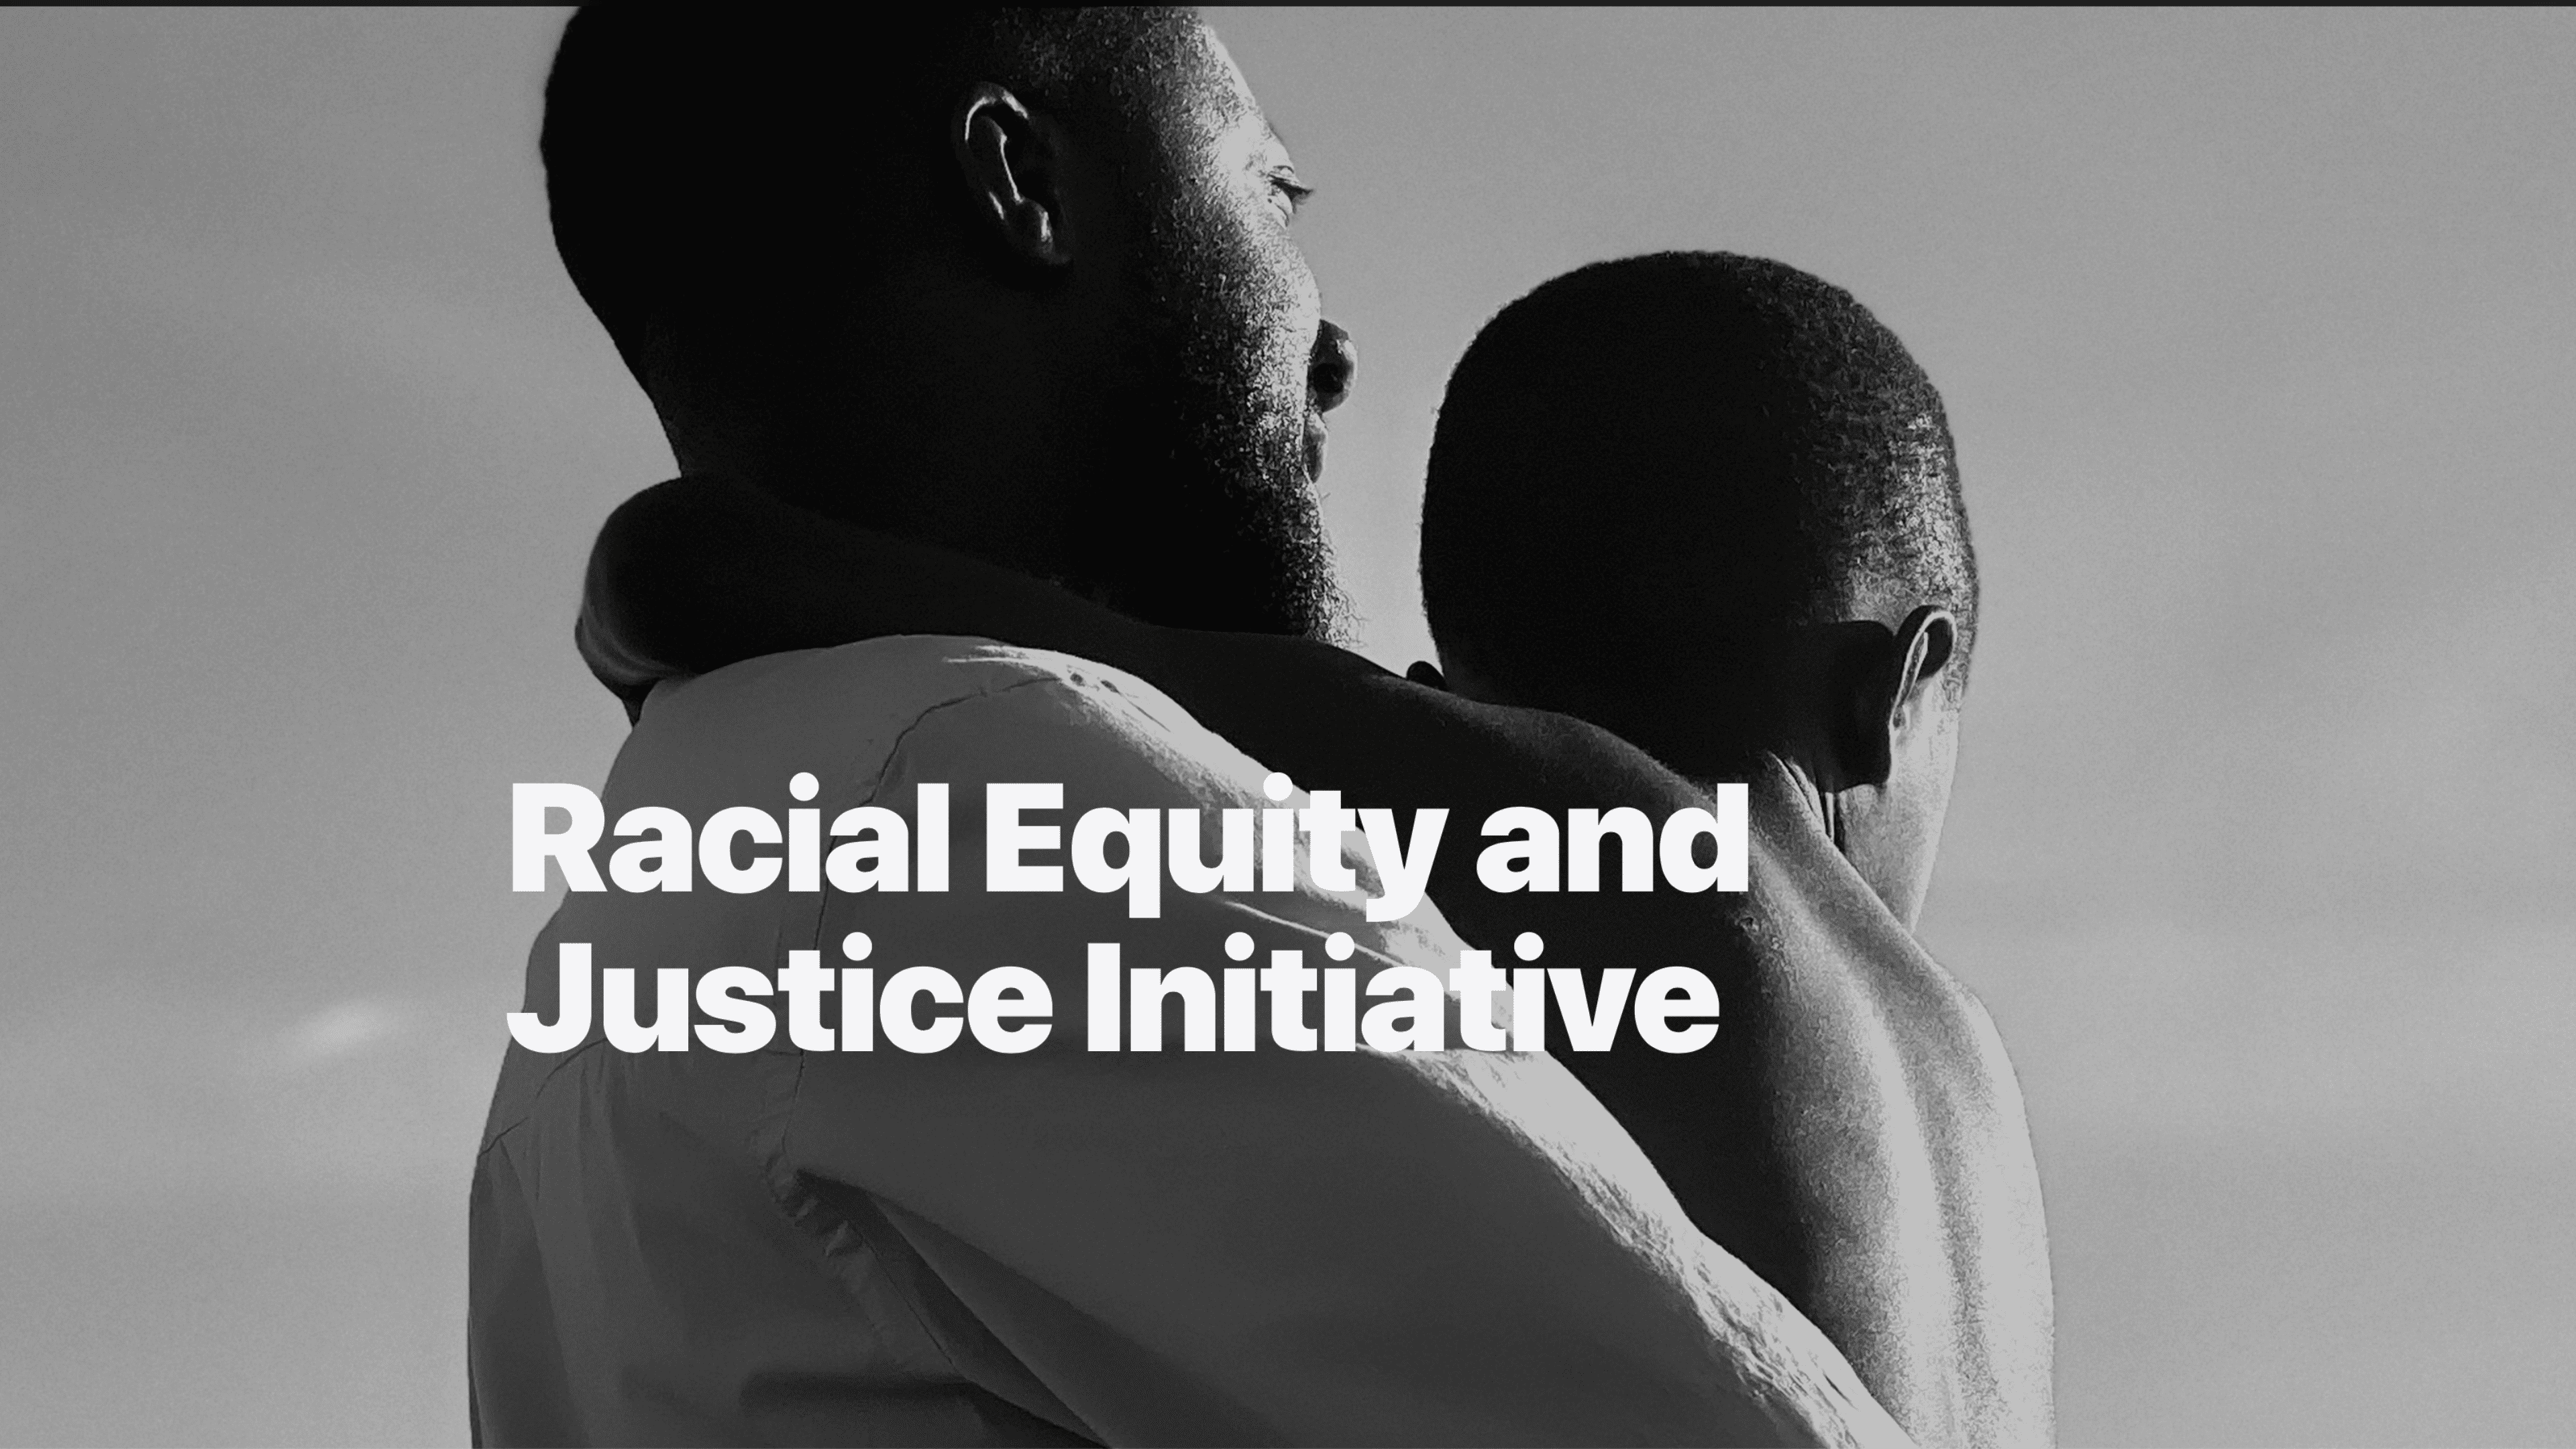 Apple: ‘We Have an Urgent Responsibility to Dismantle Systemic Racism ‘